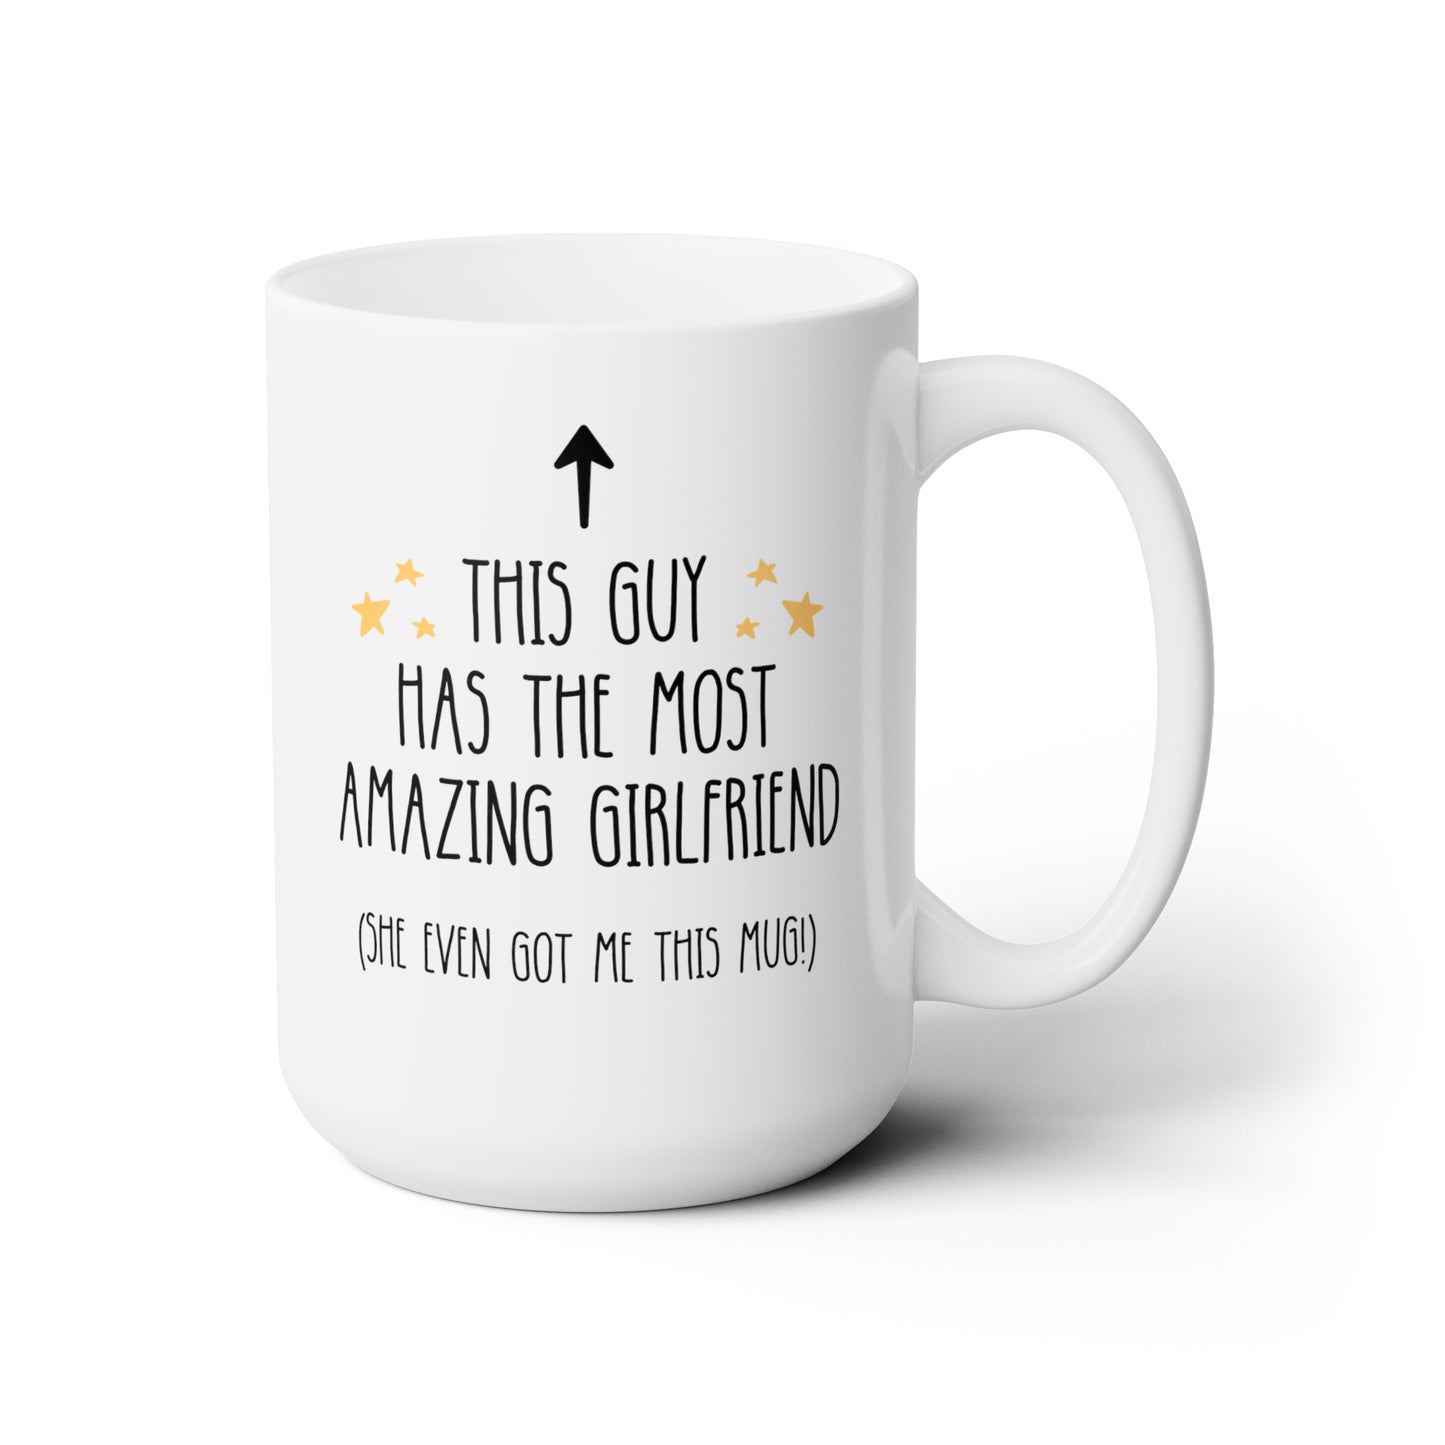 This Guy Has The Most Amazing Girlfriend 15oz white funny large coffee mug gift for boyfriend anniversary valentines him lover waveywares wavey wares wavywares wavy wares